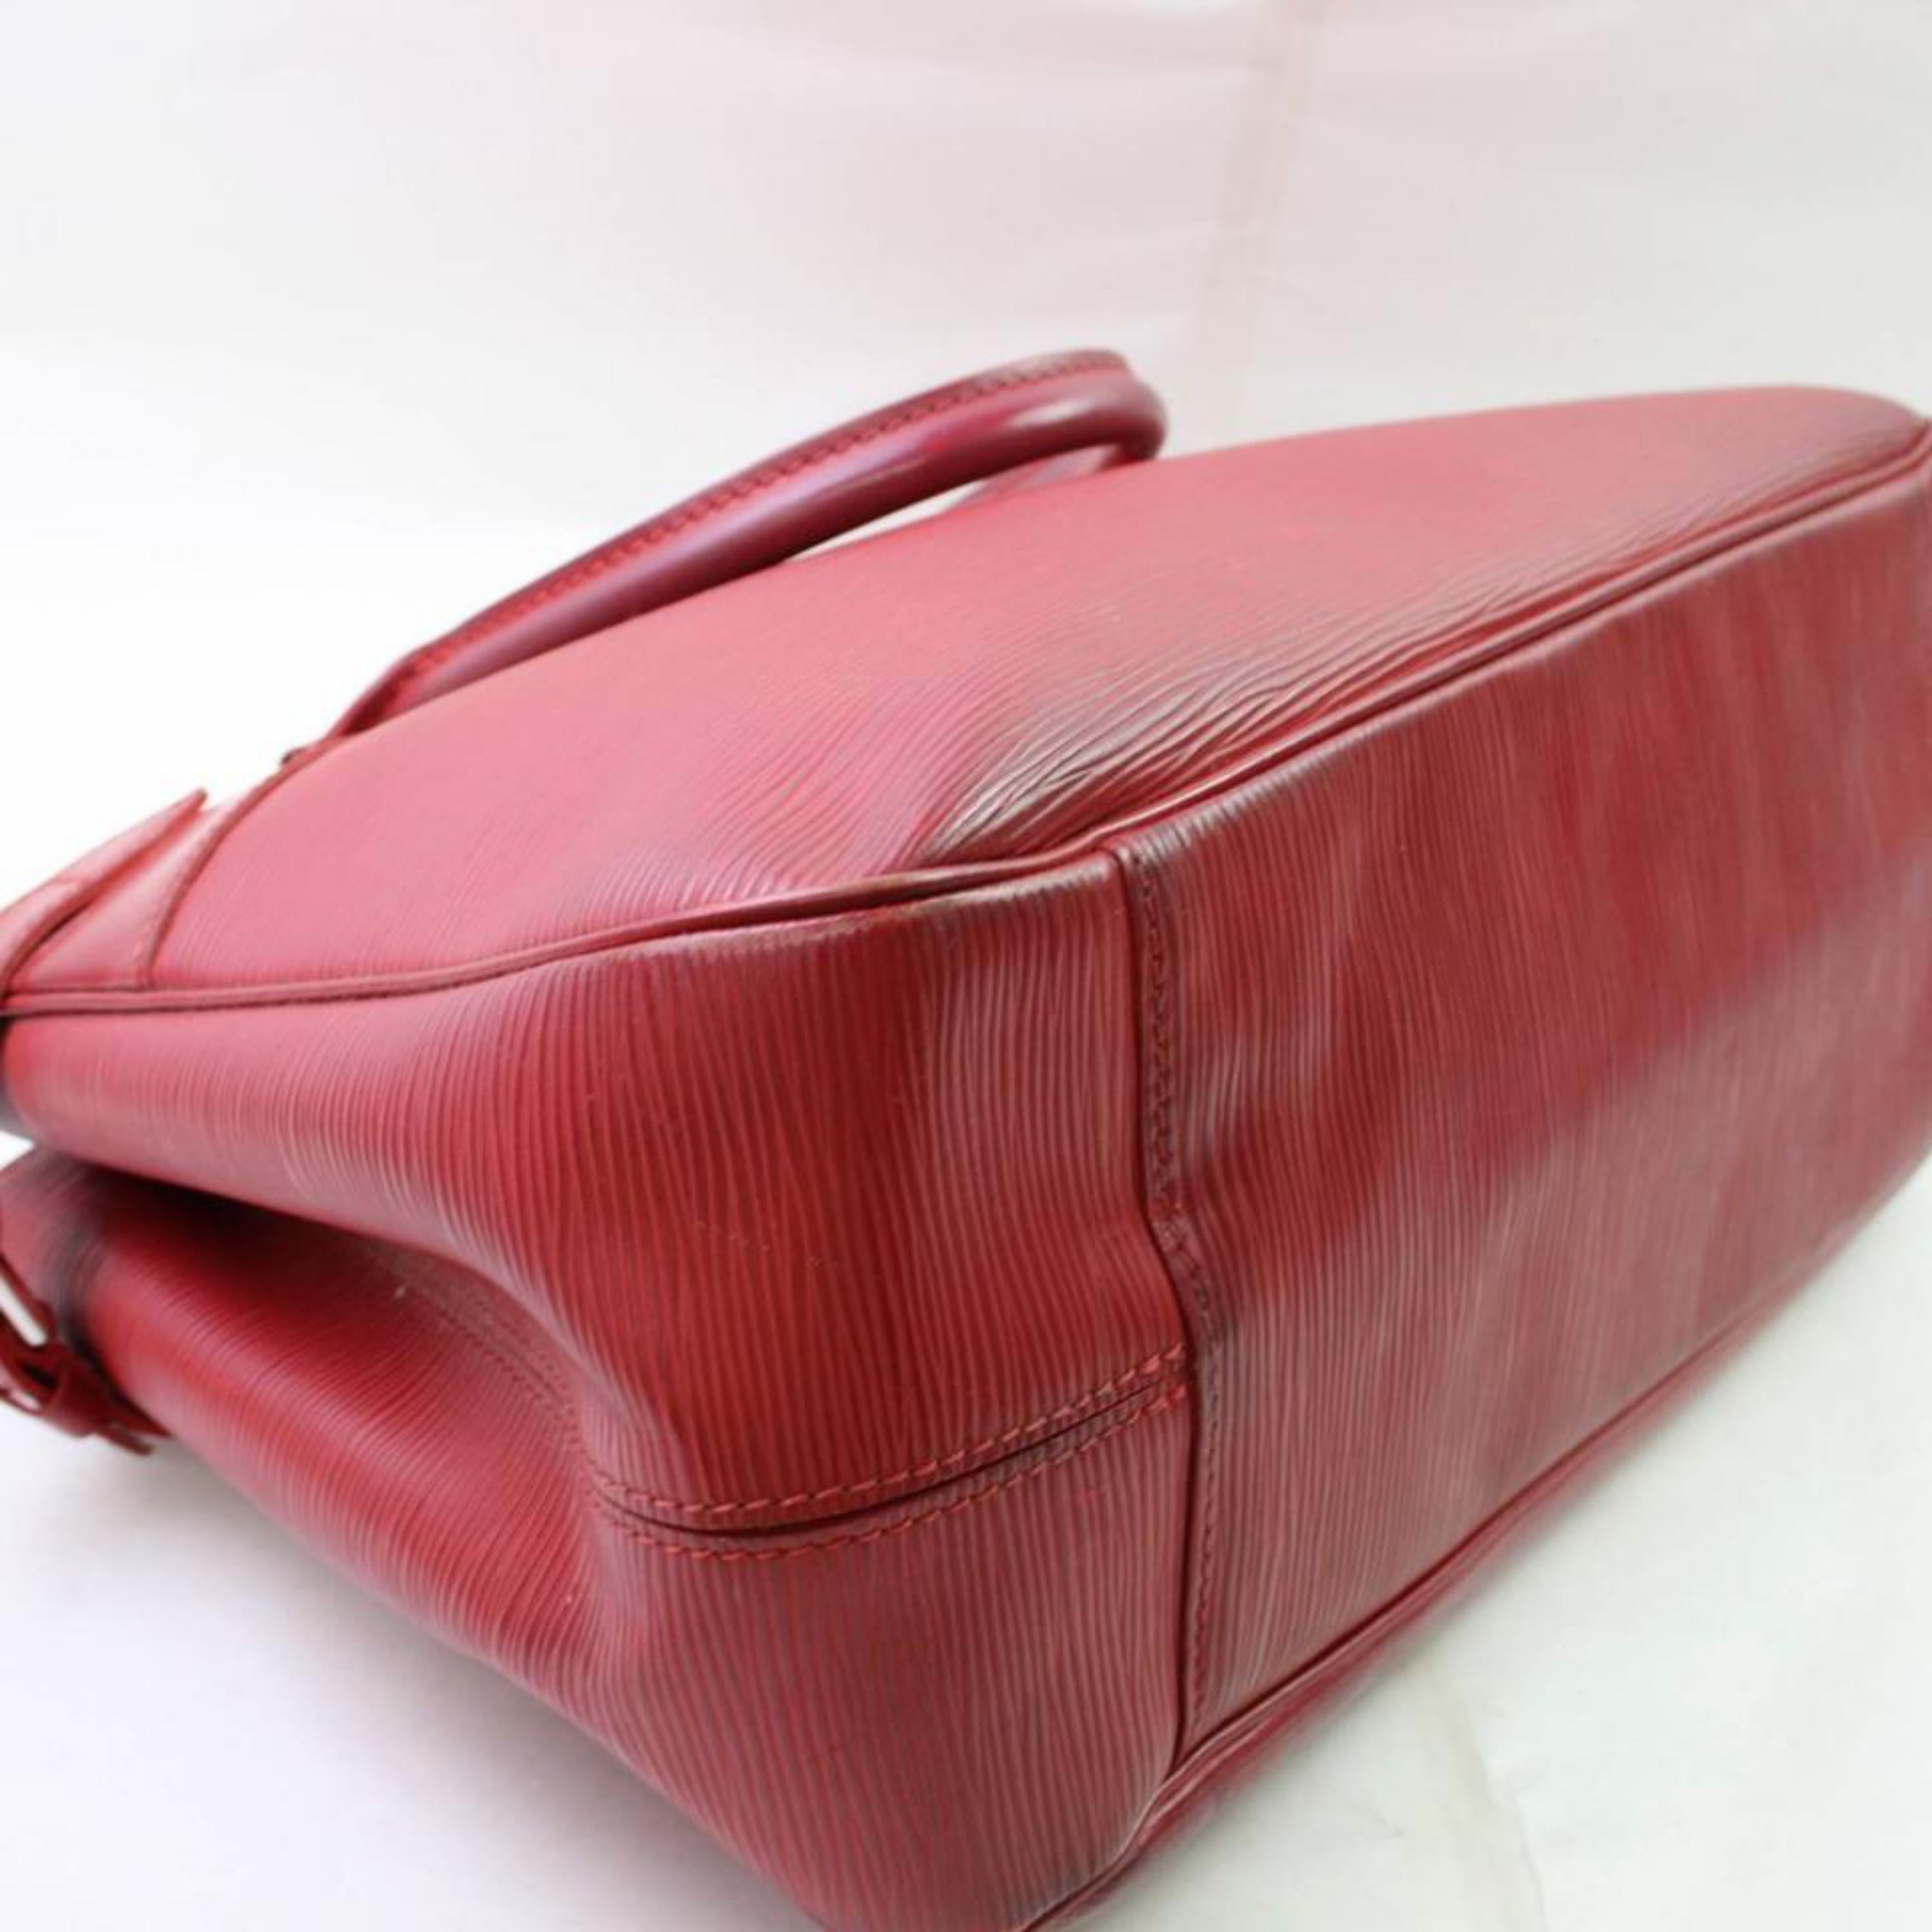 Louis Vuitton Passy Epi Pm 866705 Red Leather Satchel For Sale 1